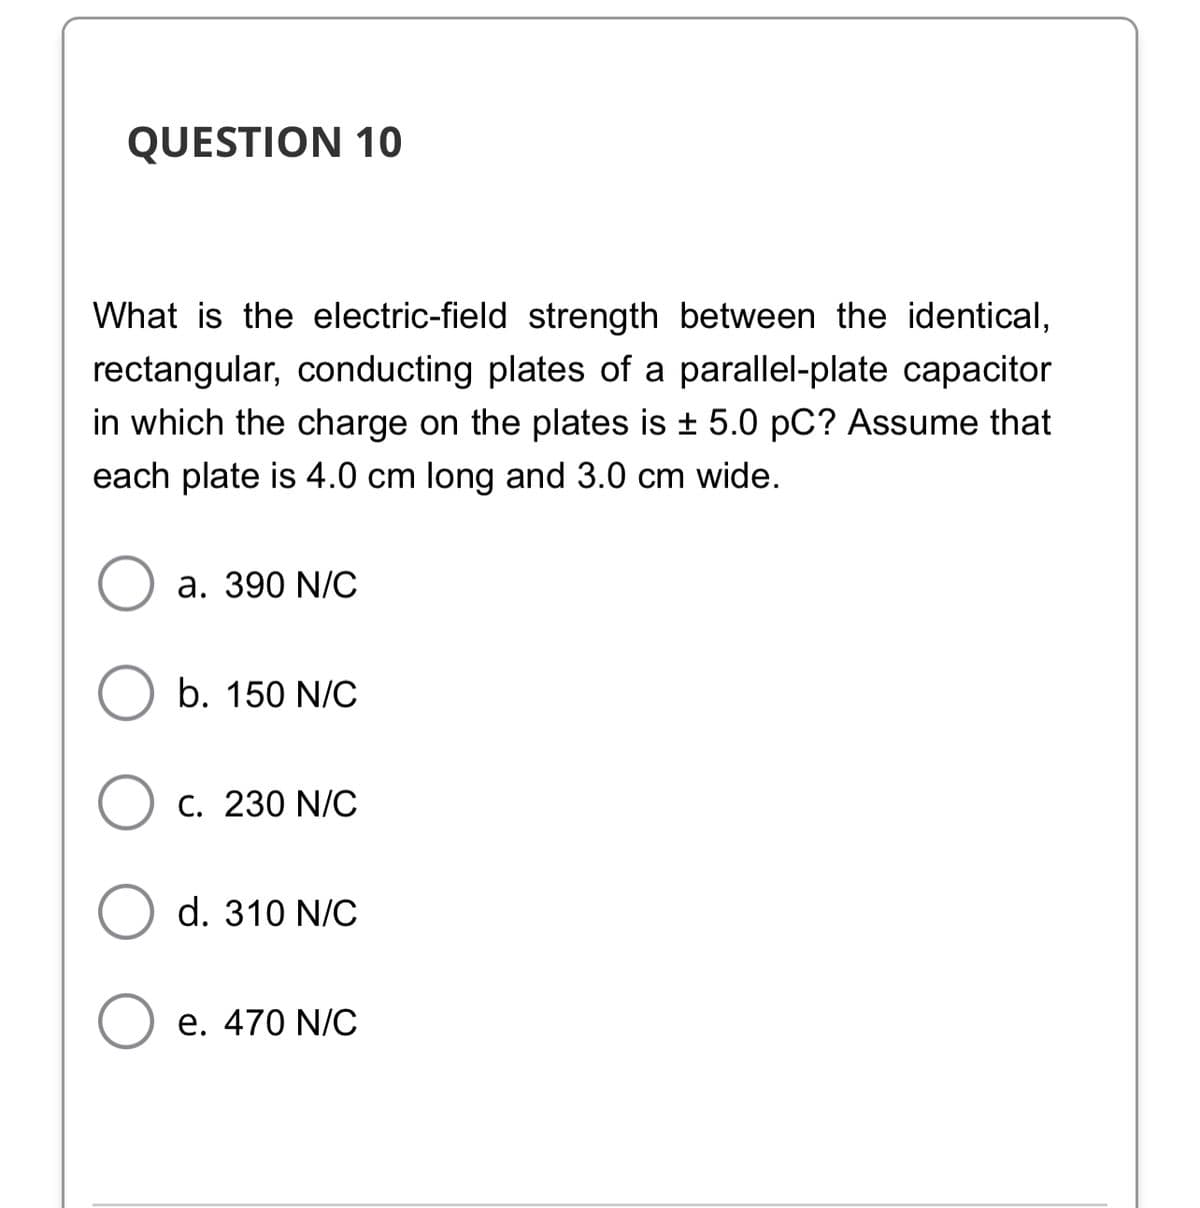 QUESTION 10
What is the electric-field strength between the identical,
rectangular, conducting plates of a parallel-plate capacitor
in which the charge on the plates is + 5.0 pC? Assume that
each plate is 4.0 cm long and 3.0 cm wide.
a. 390 N/C
b. 150 N/C
C. 230 N/C
d. 310 N/C
e. 470 N/C
